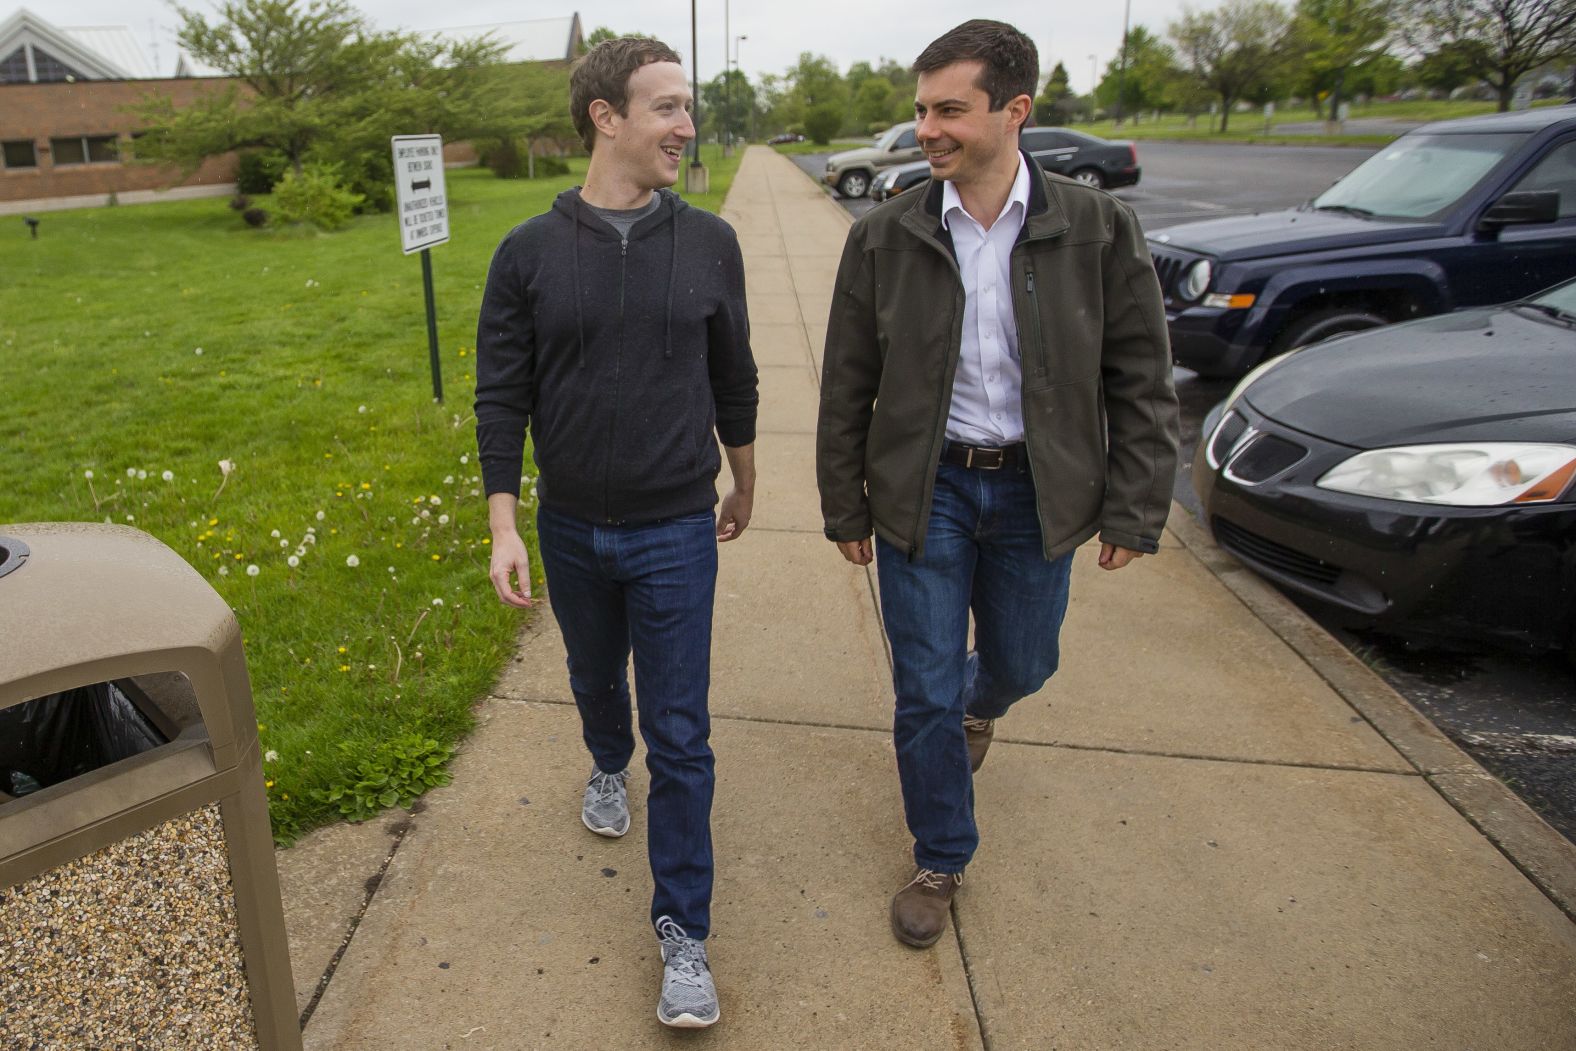 Buttigieg walks with Facebook CEO Mark Zuckerberg, a personal friend, who was <a href="index.php?page=&url=https%3A%2F%2Fwww.indystar.com%2Fstory%2Fnews%2F2017%2F05%2F01%2Fwhy-facebook-ceo-mark-zuckerberg-hanging-out-south-bend-mayor-pete-buttigieg-and-elkhart-firefighters%2F101145566%2F" target="_blank" target="_blank">visiting South Bend</a> in April 2017.